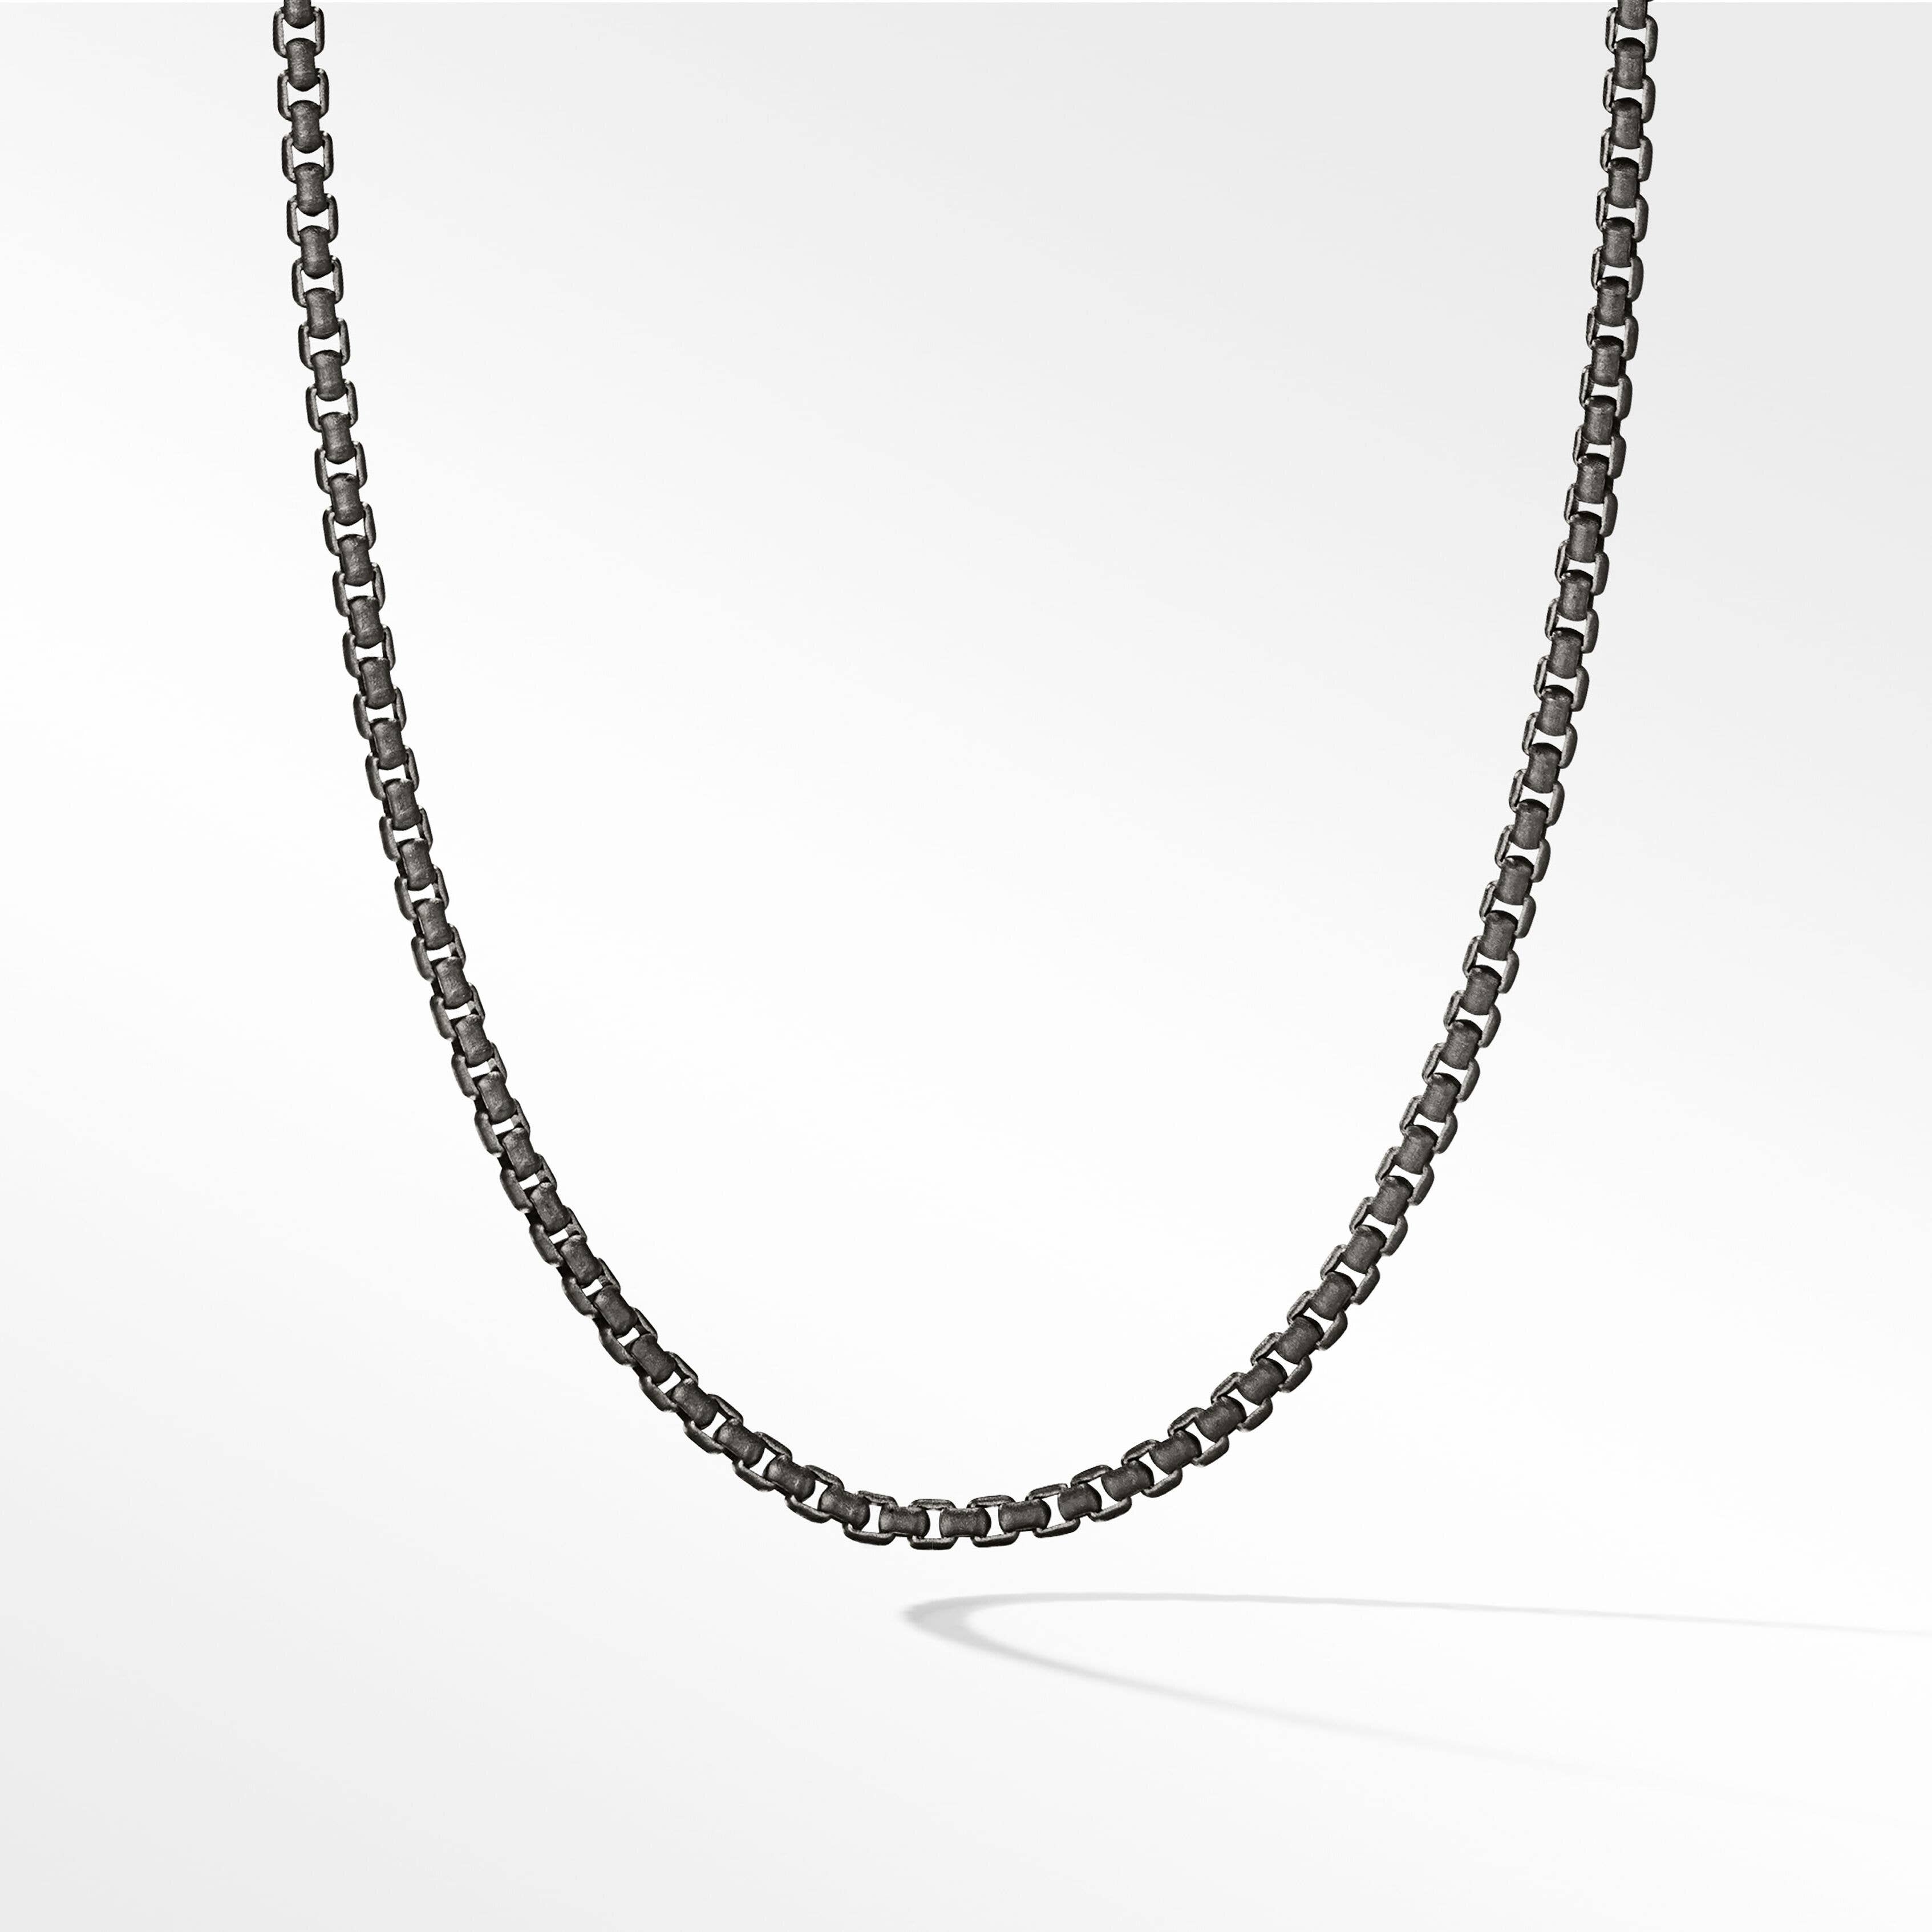 Box Chain Necklace with Darkened Silver